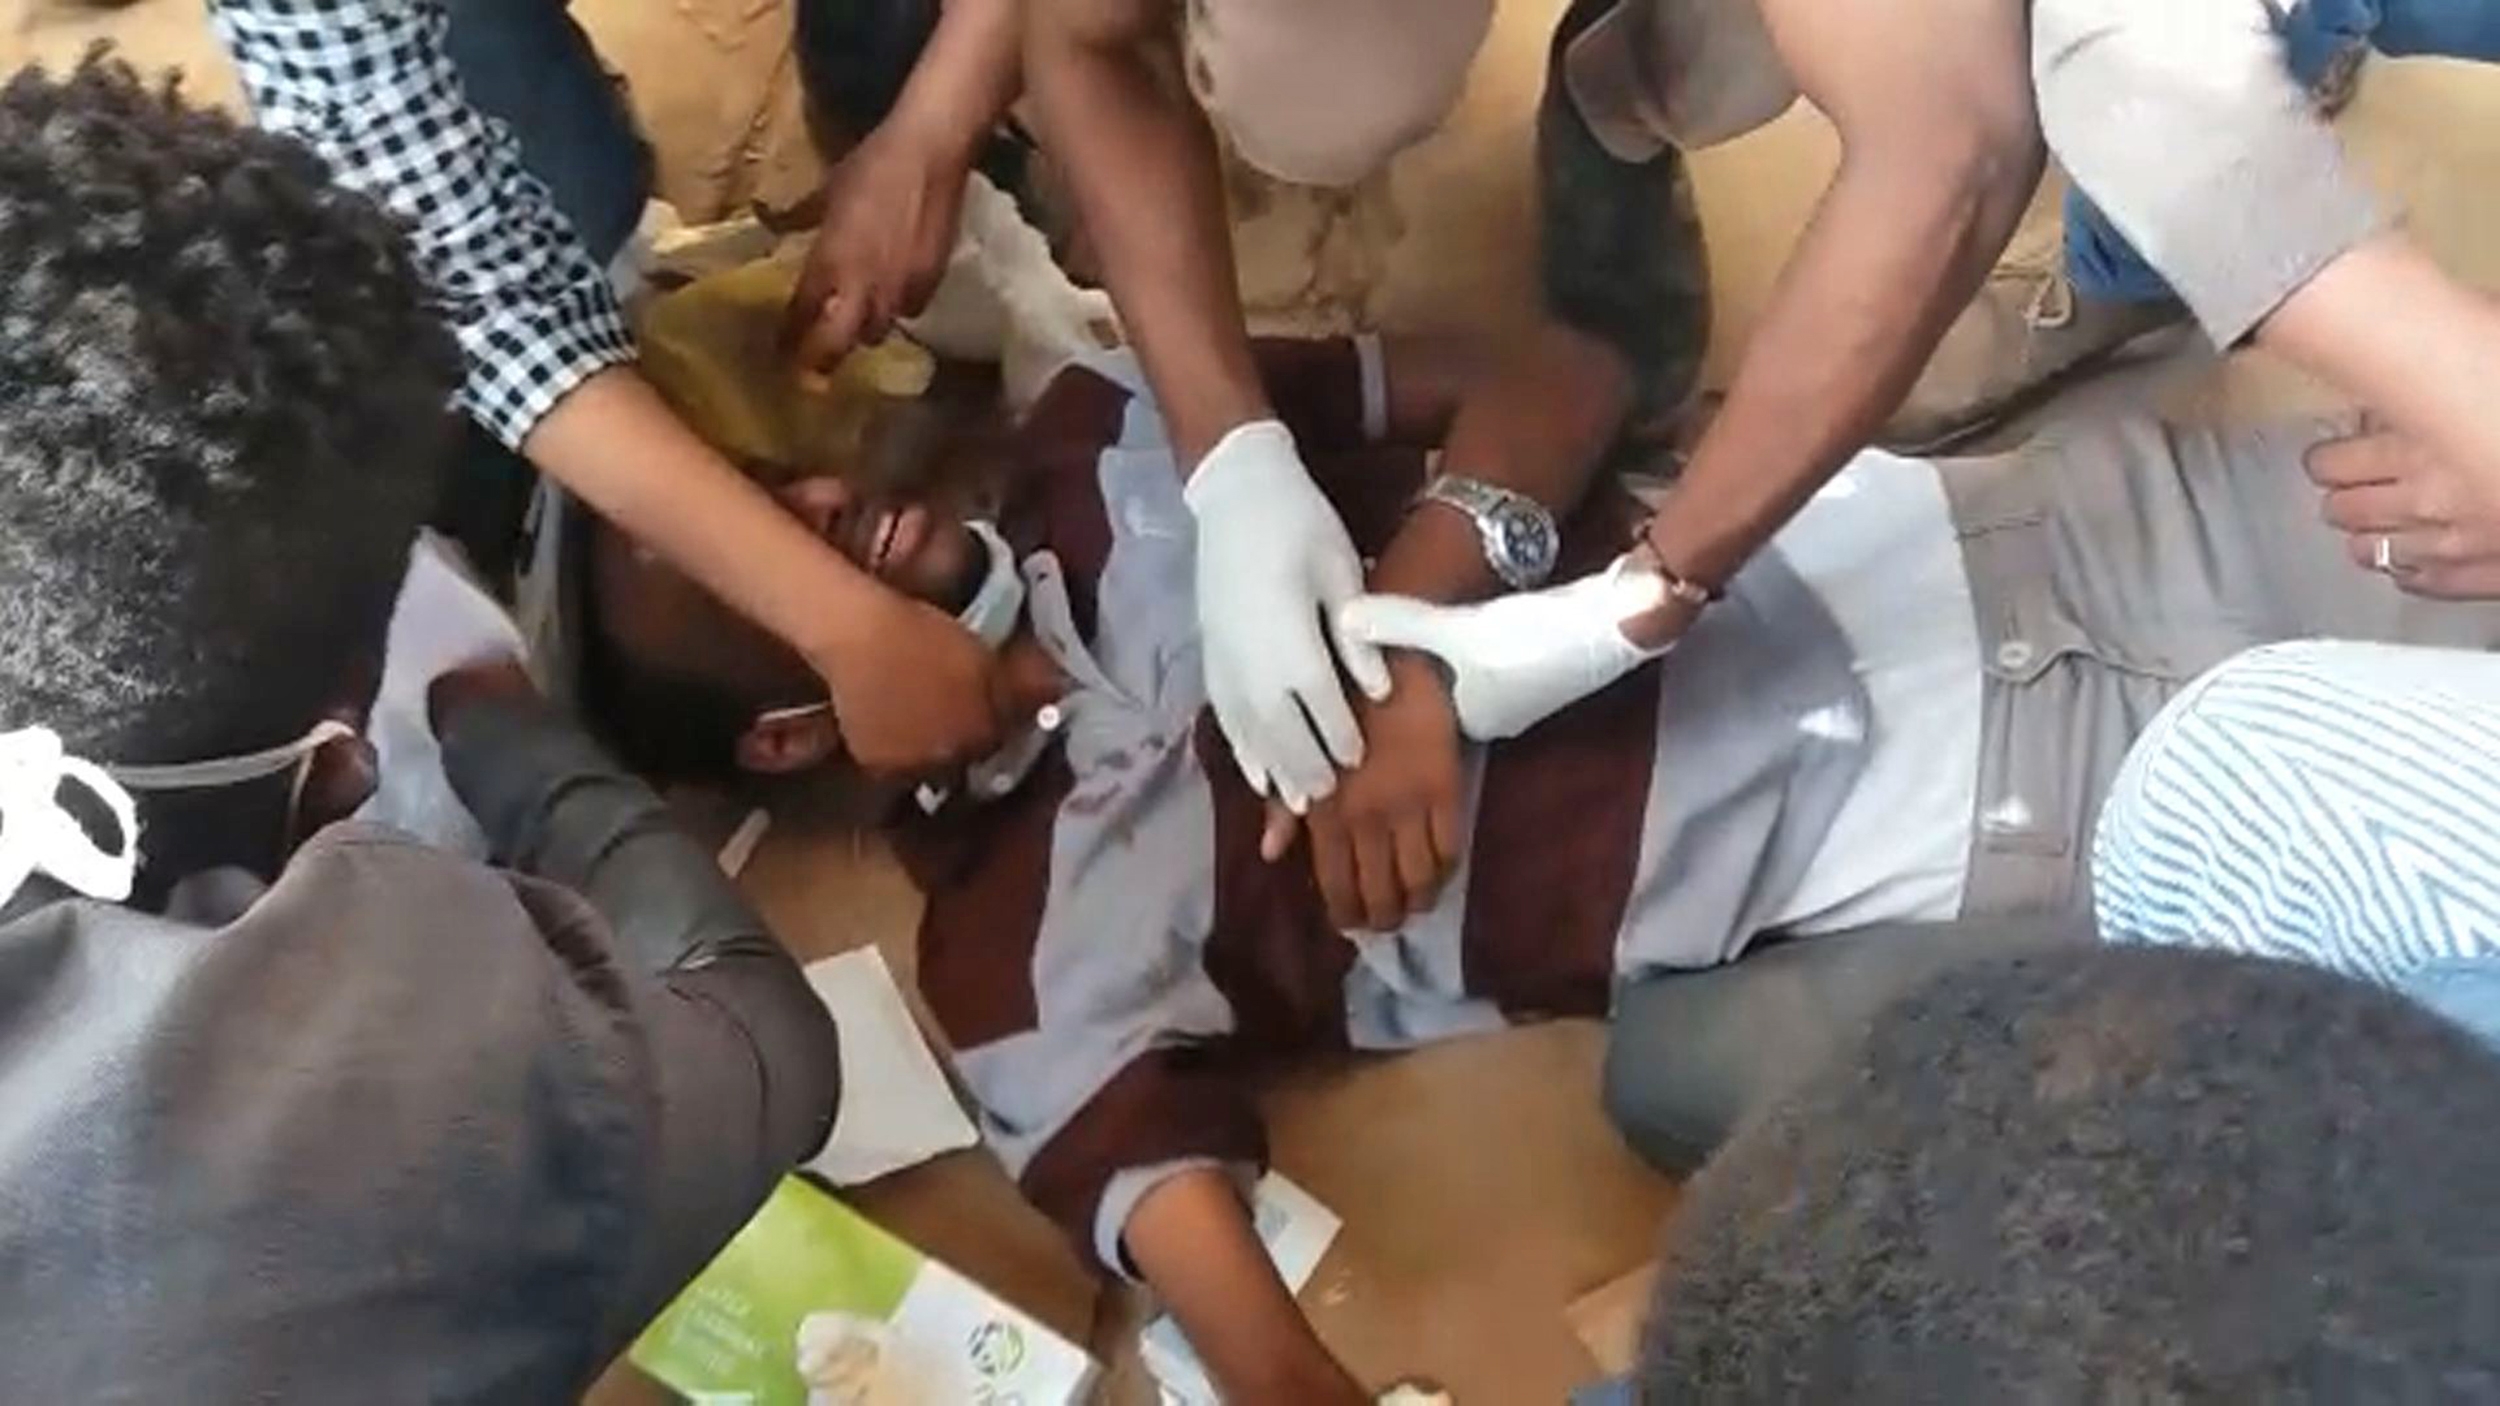 Medics look after an injured man after Sudanese police fired tear gas at protesters in Khartoum on 17 January (AFP)